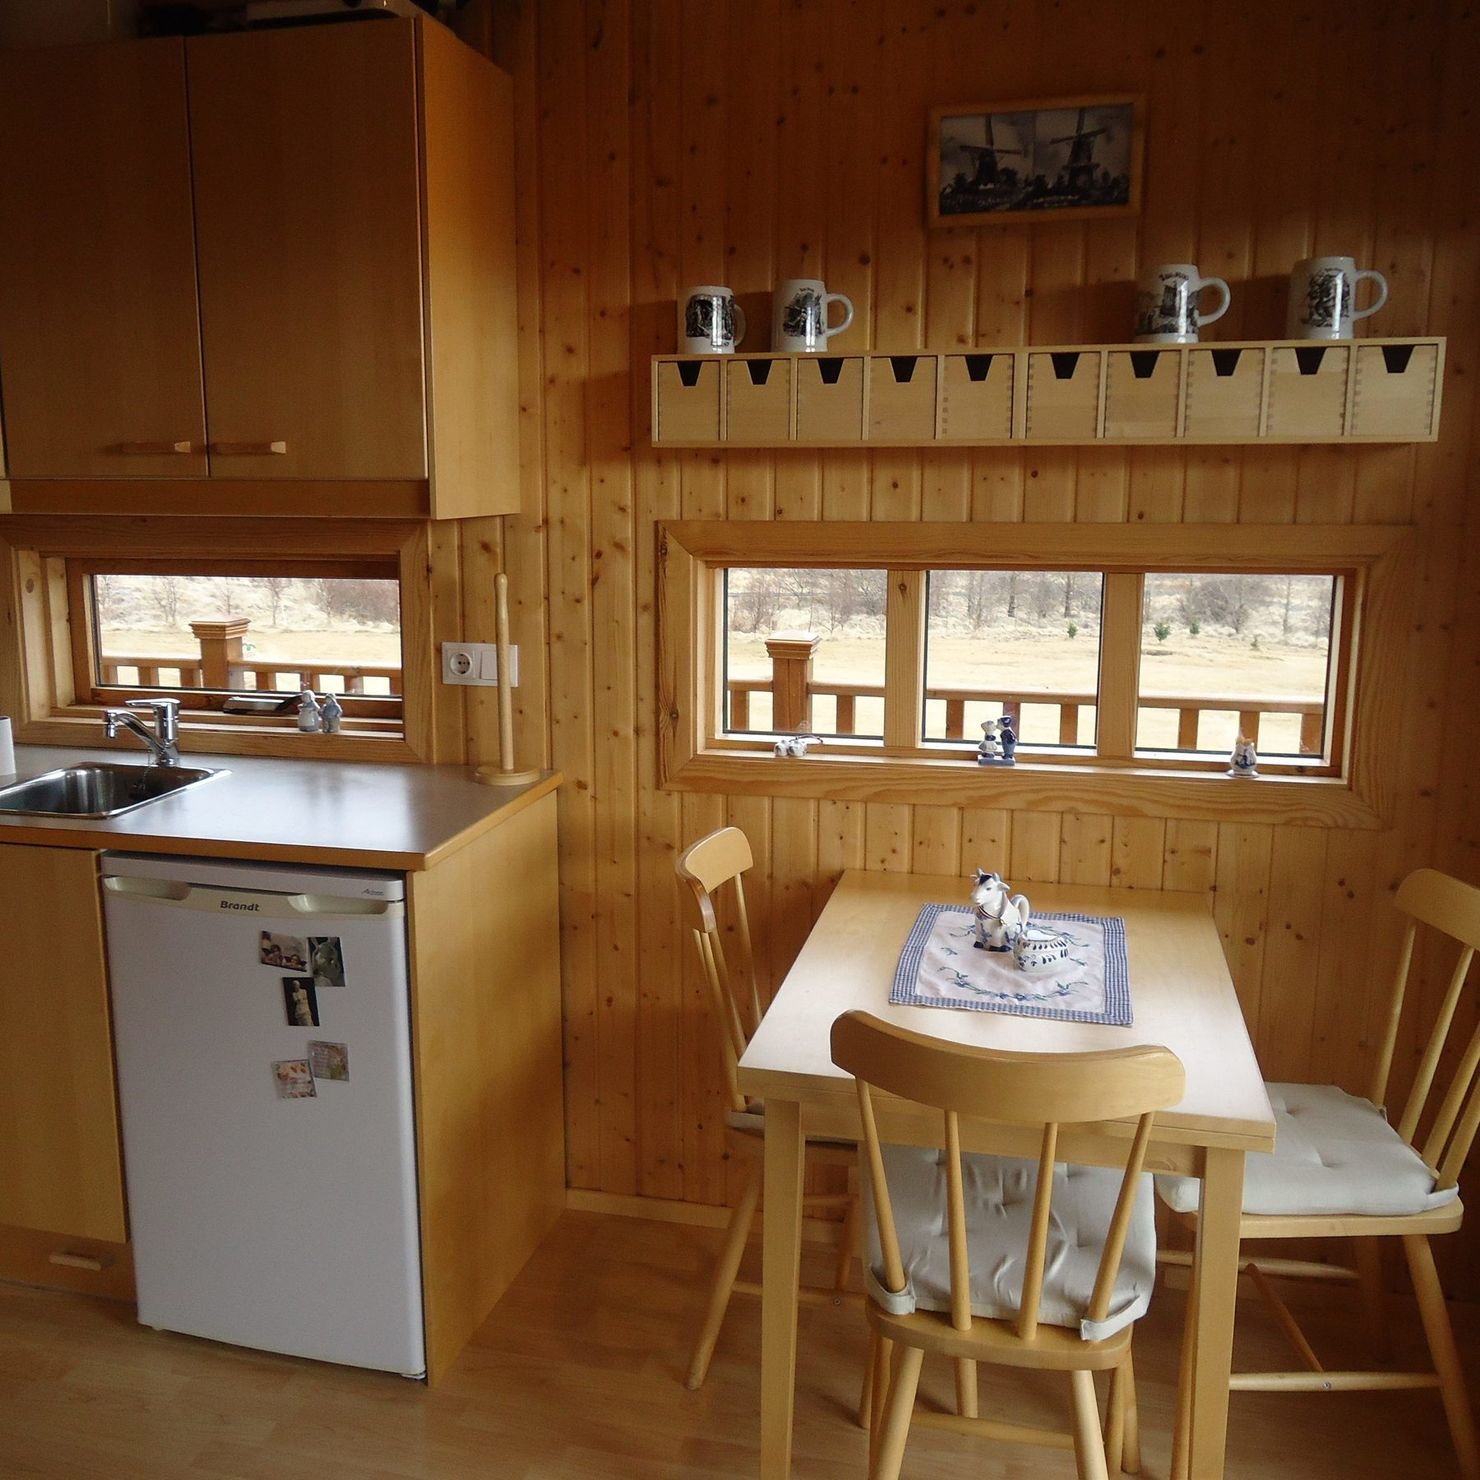 Kitchenette with dining table for three people